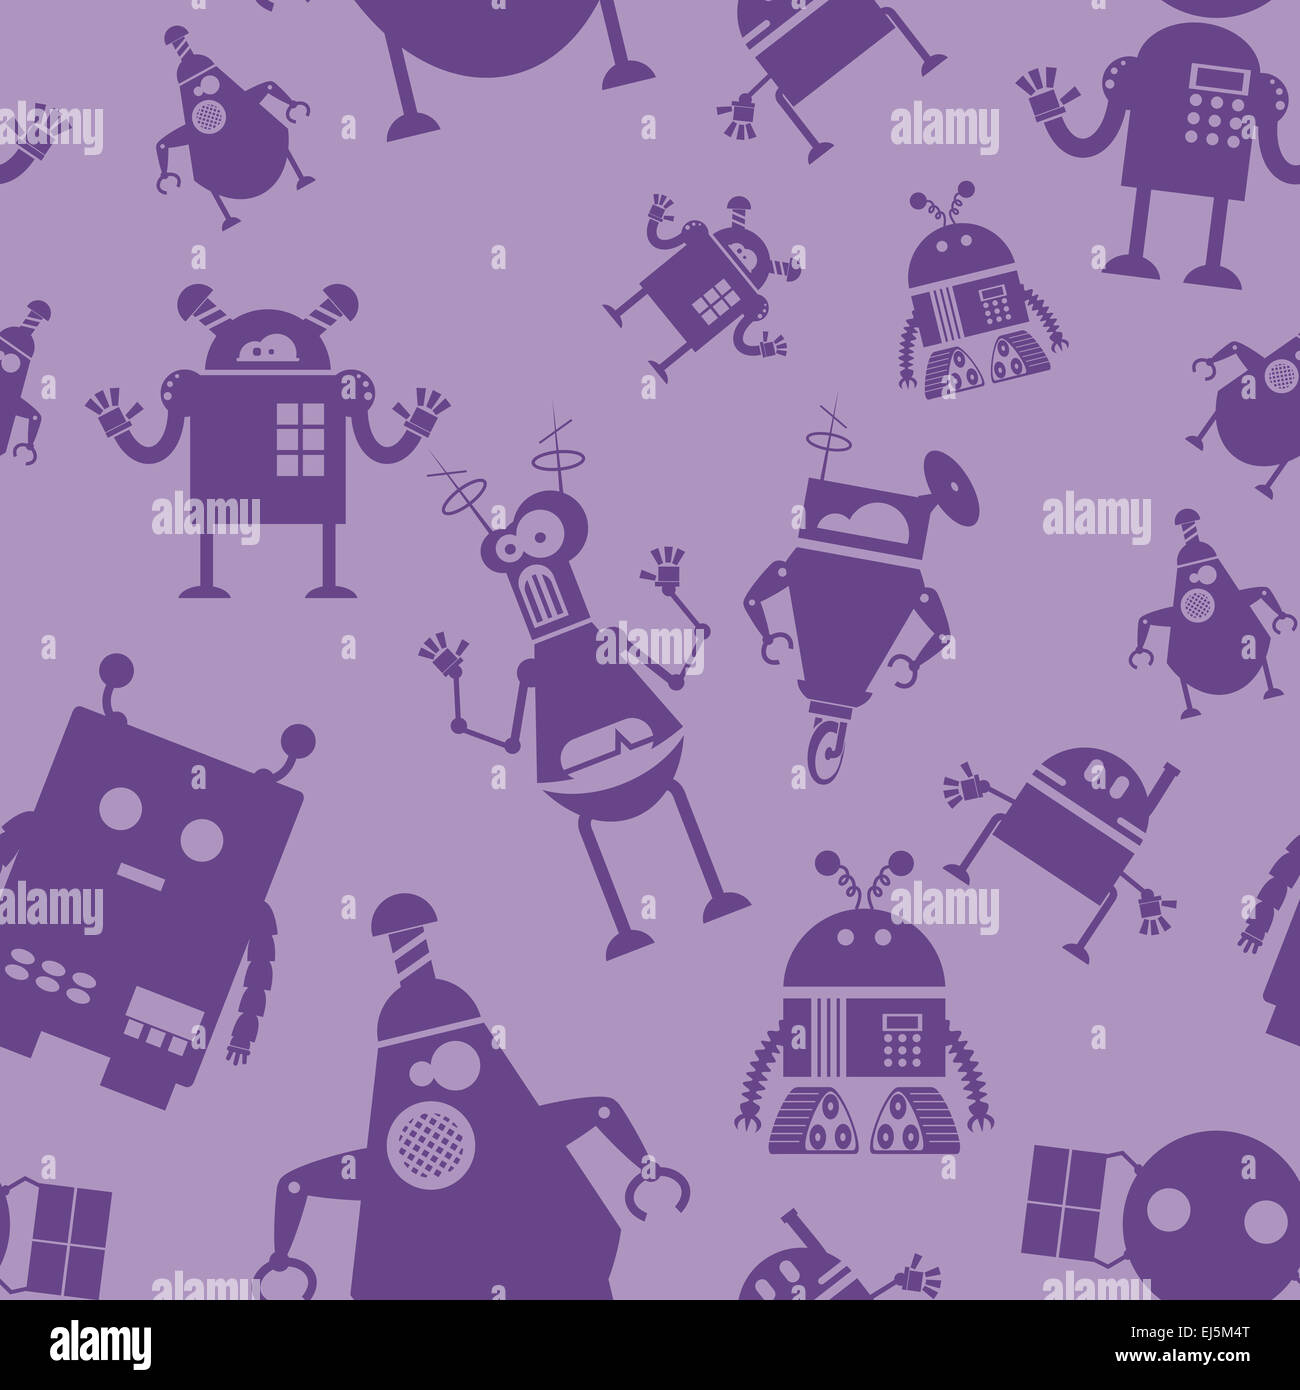 Vector image of seamless pattern with robots Stock Photo